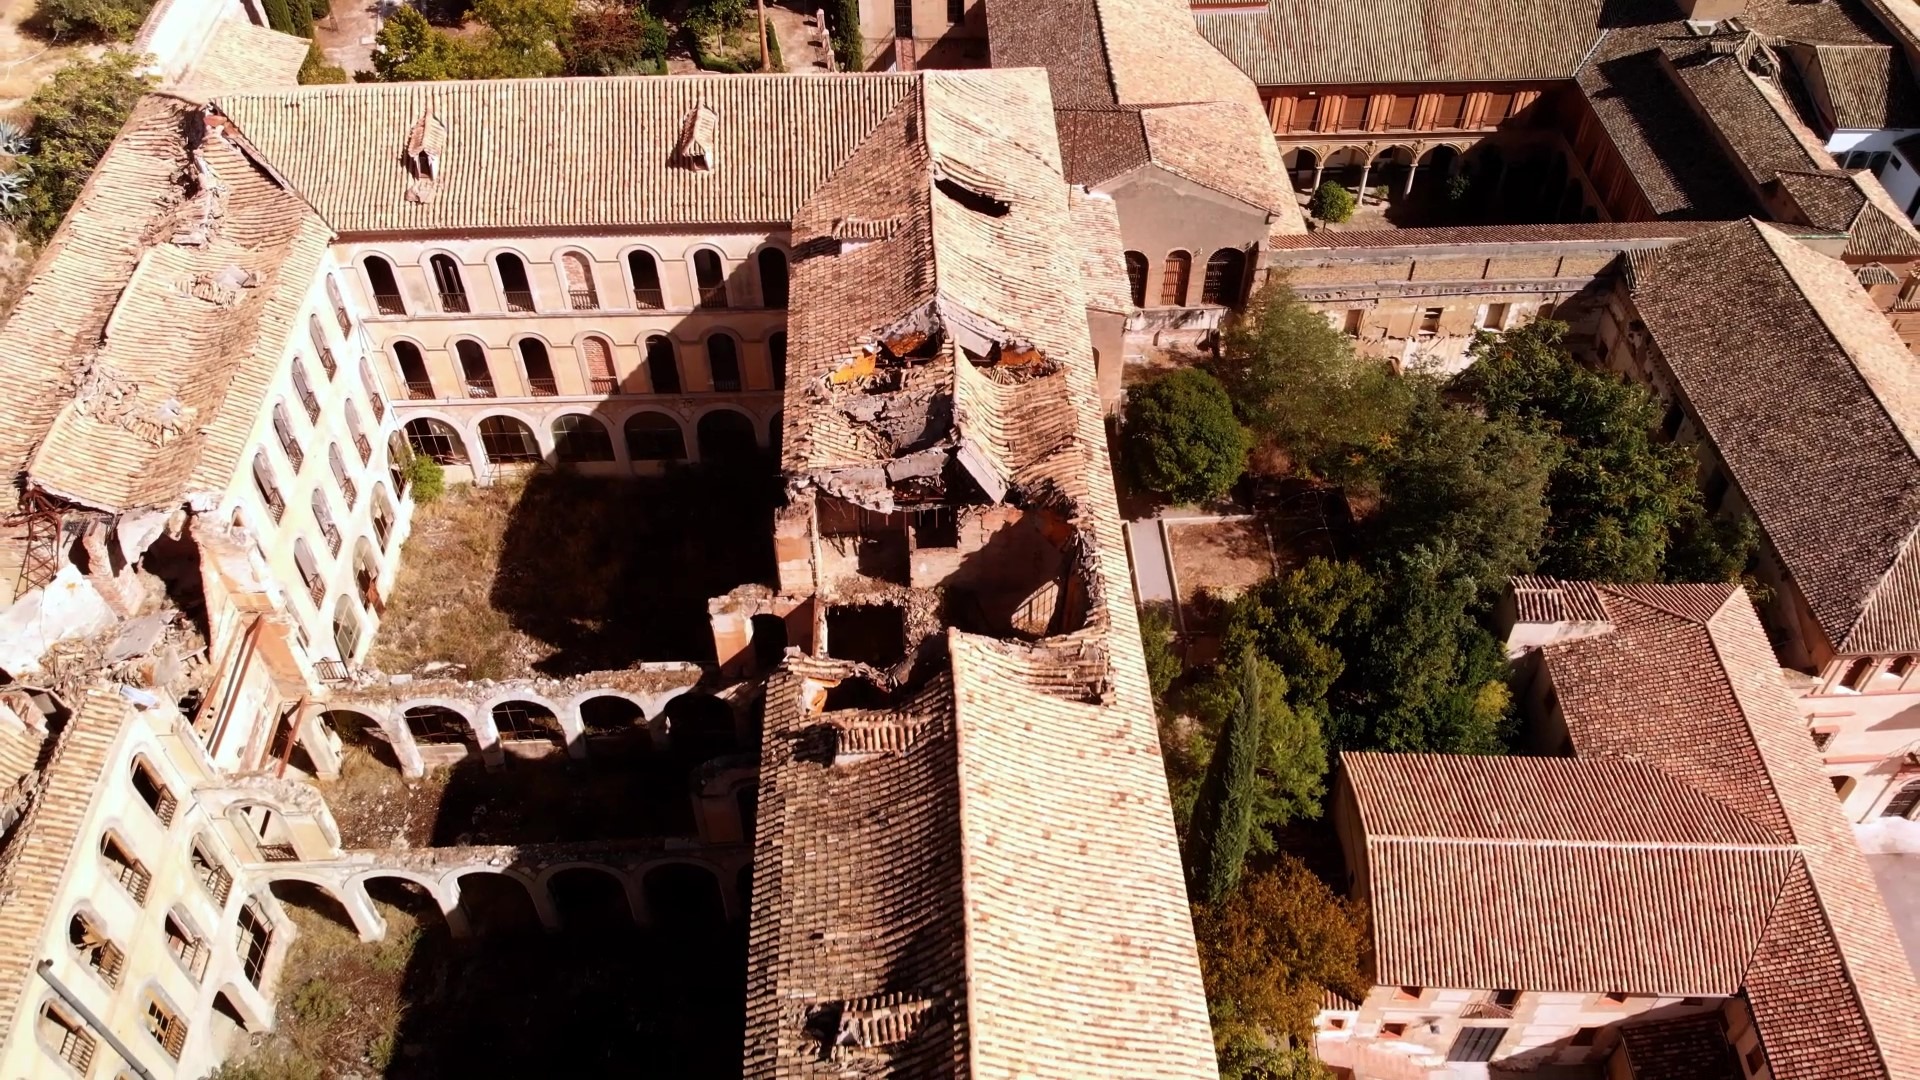 The destroyed part of the Sacromonte Abbey in Granada